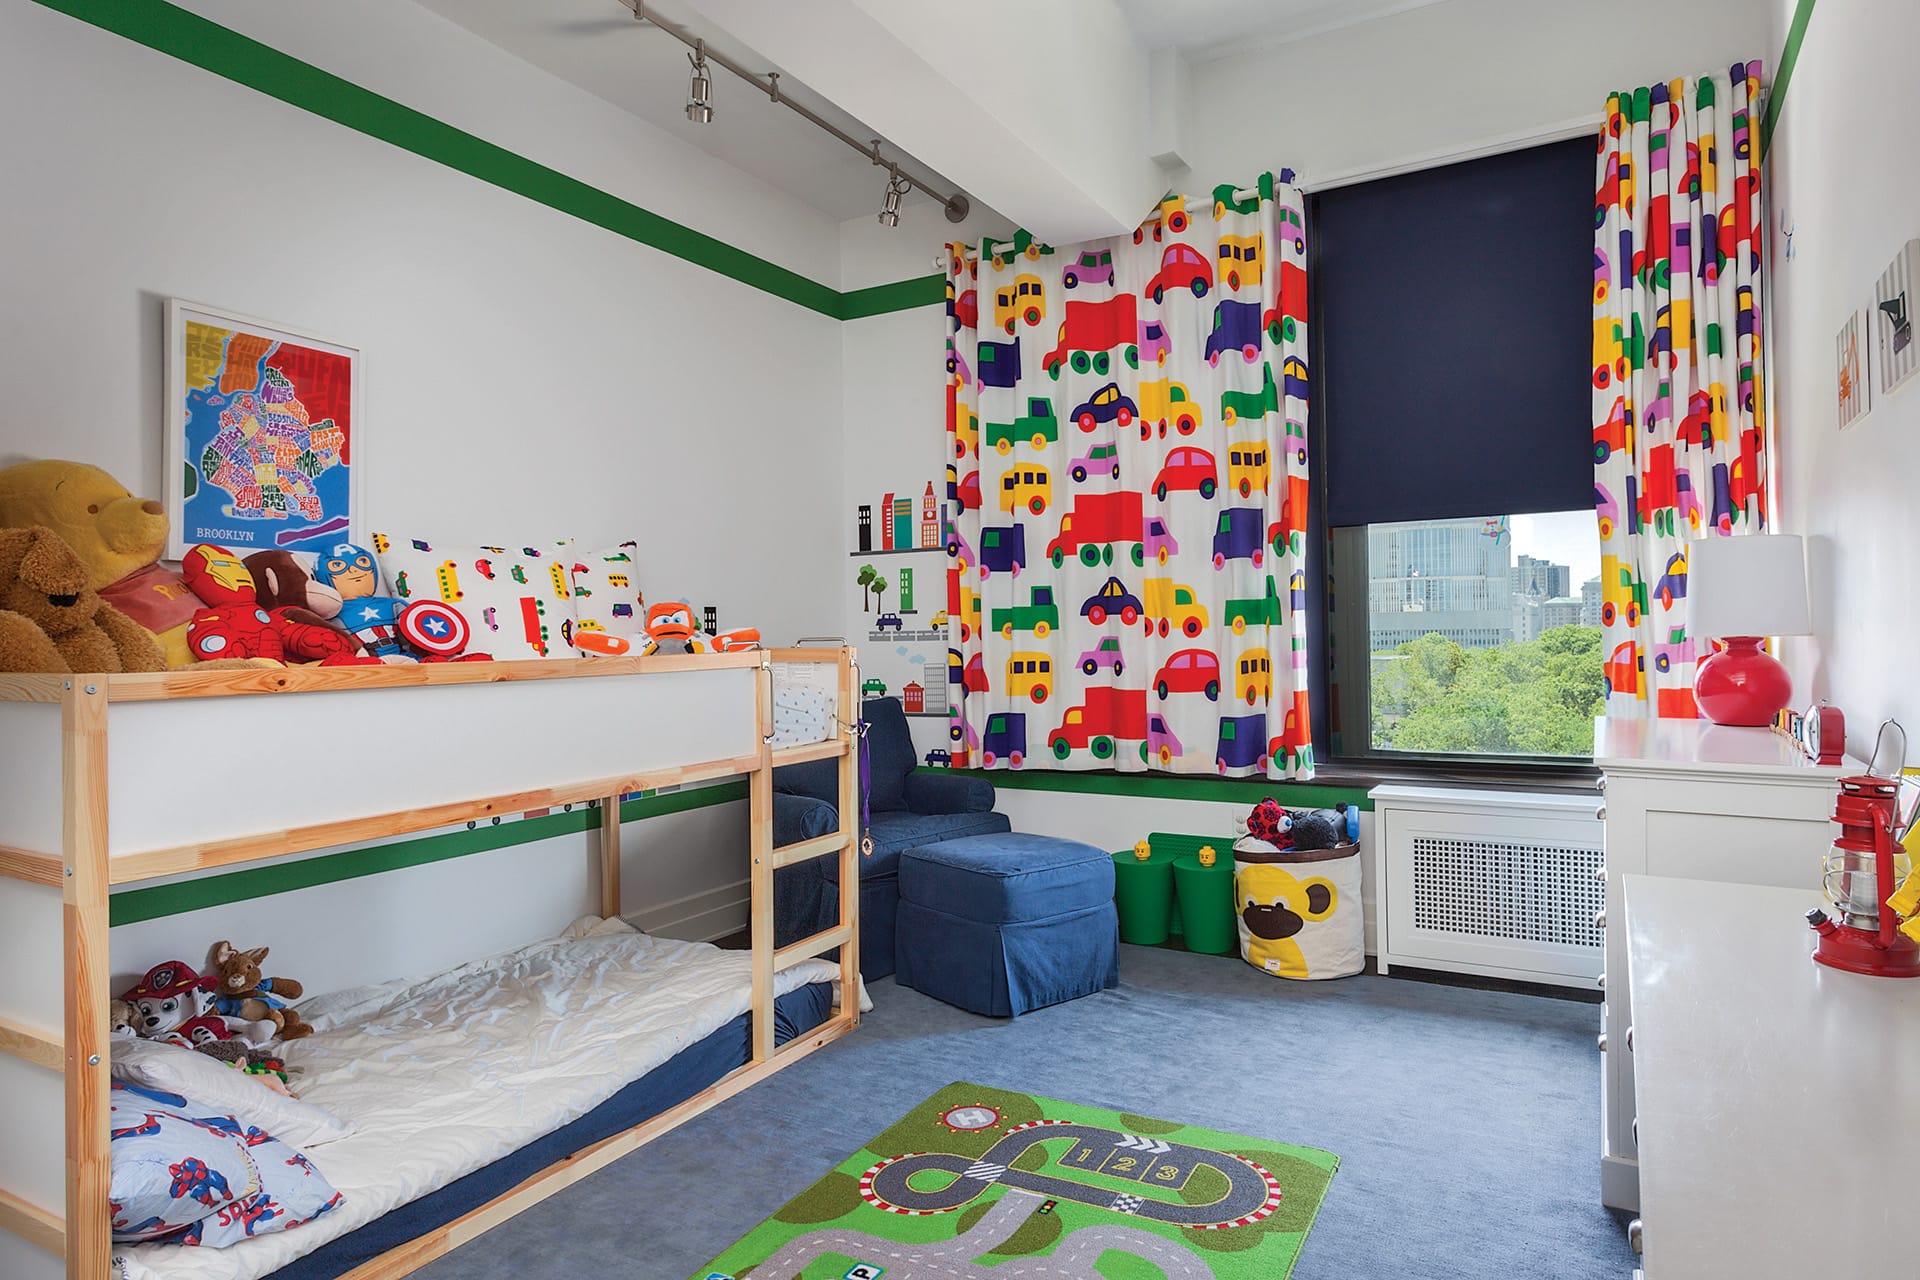 Kids room with bunk beds, blue carpet, car-print curtains, and a row of toys on top of the bed.